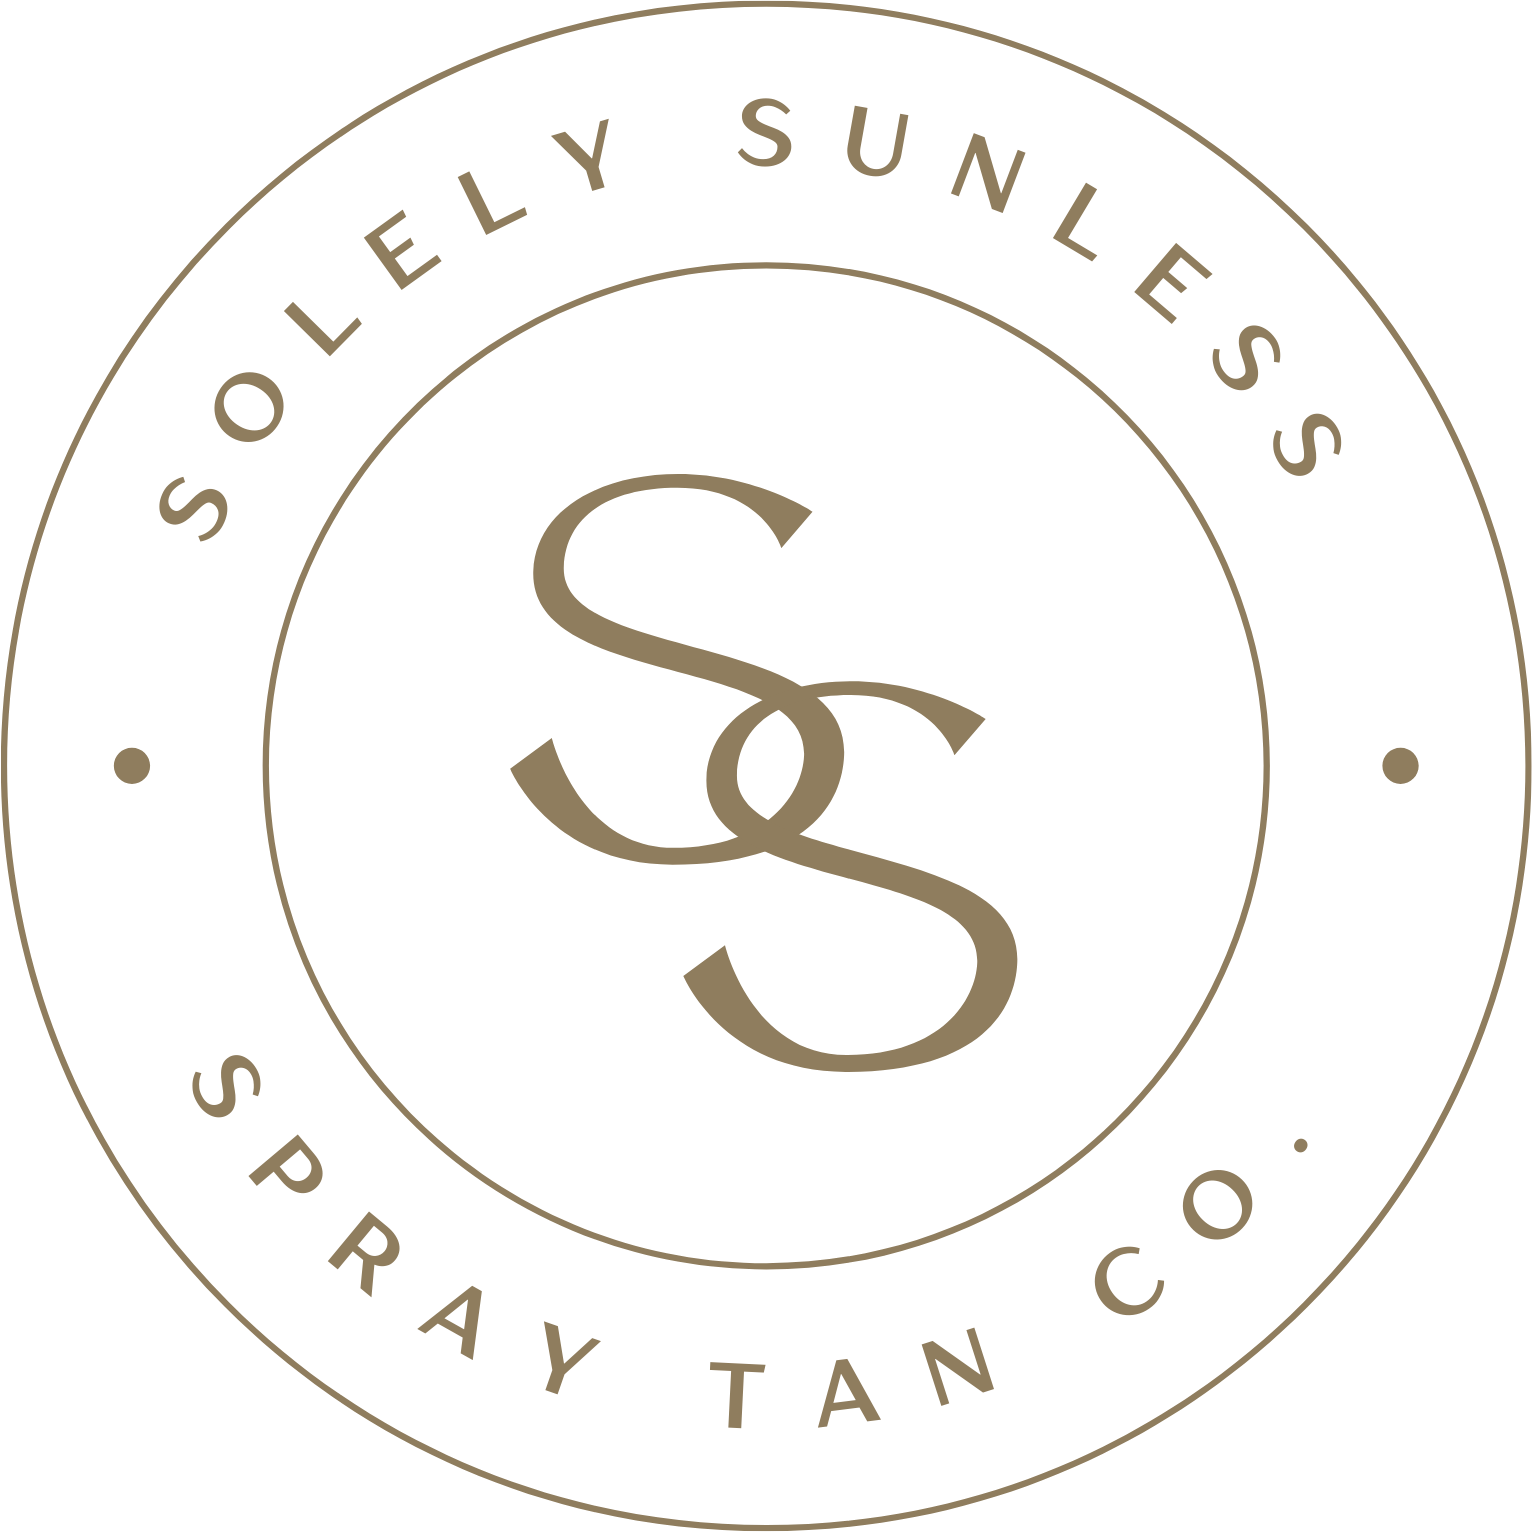 Solely Sunless Spray Tan Co.